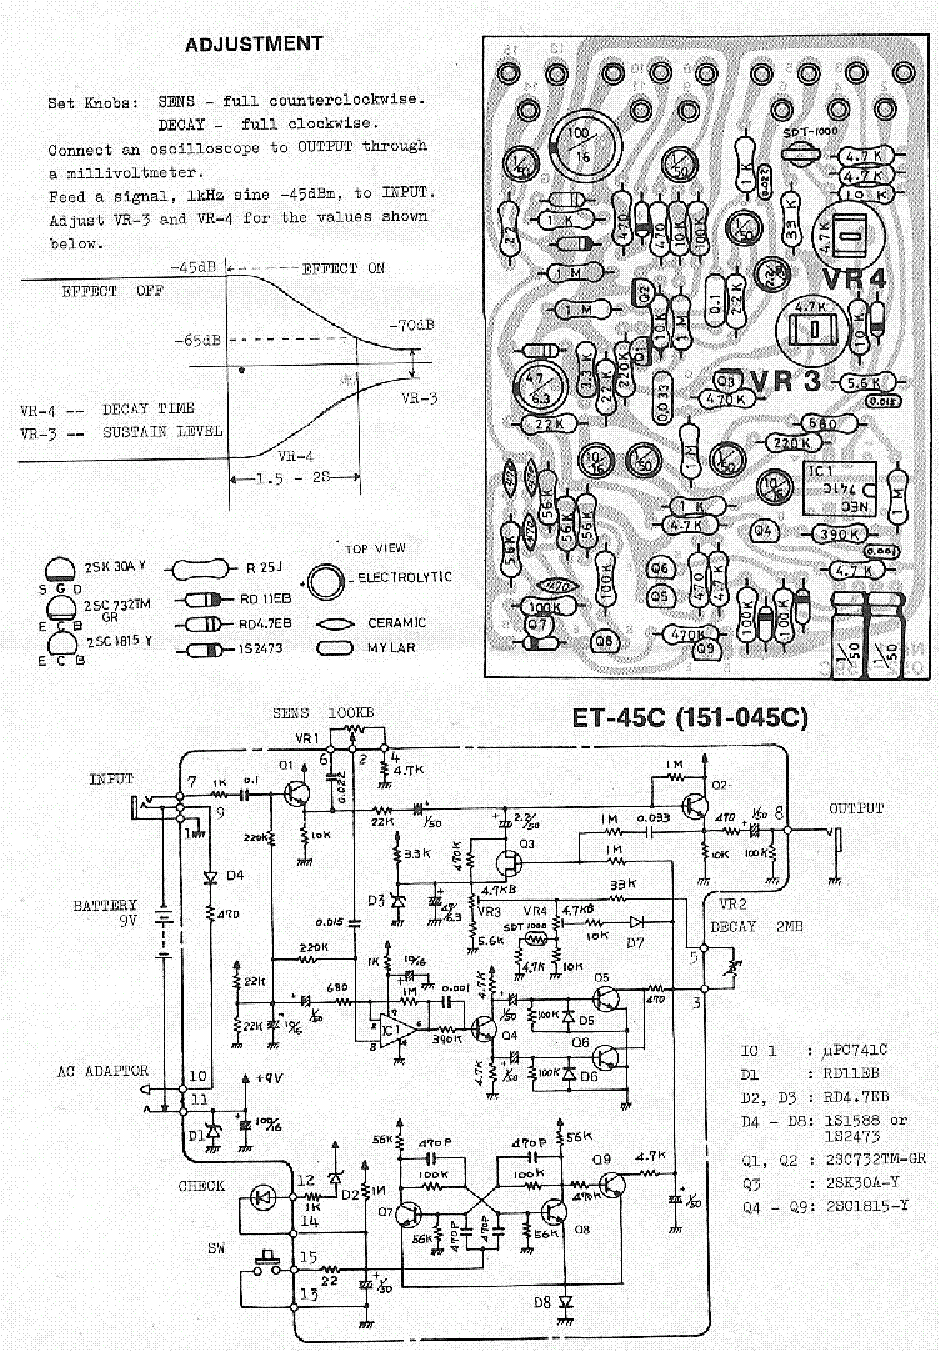 BOSS NF-1 NOISEGATE SCH service manual (1st page)